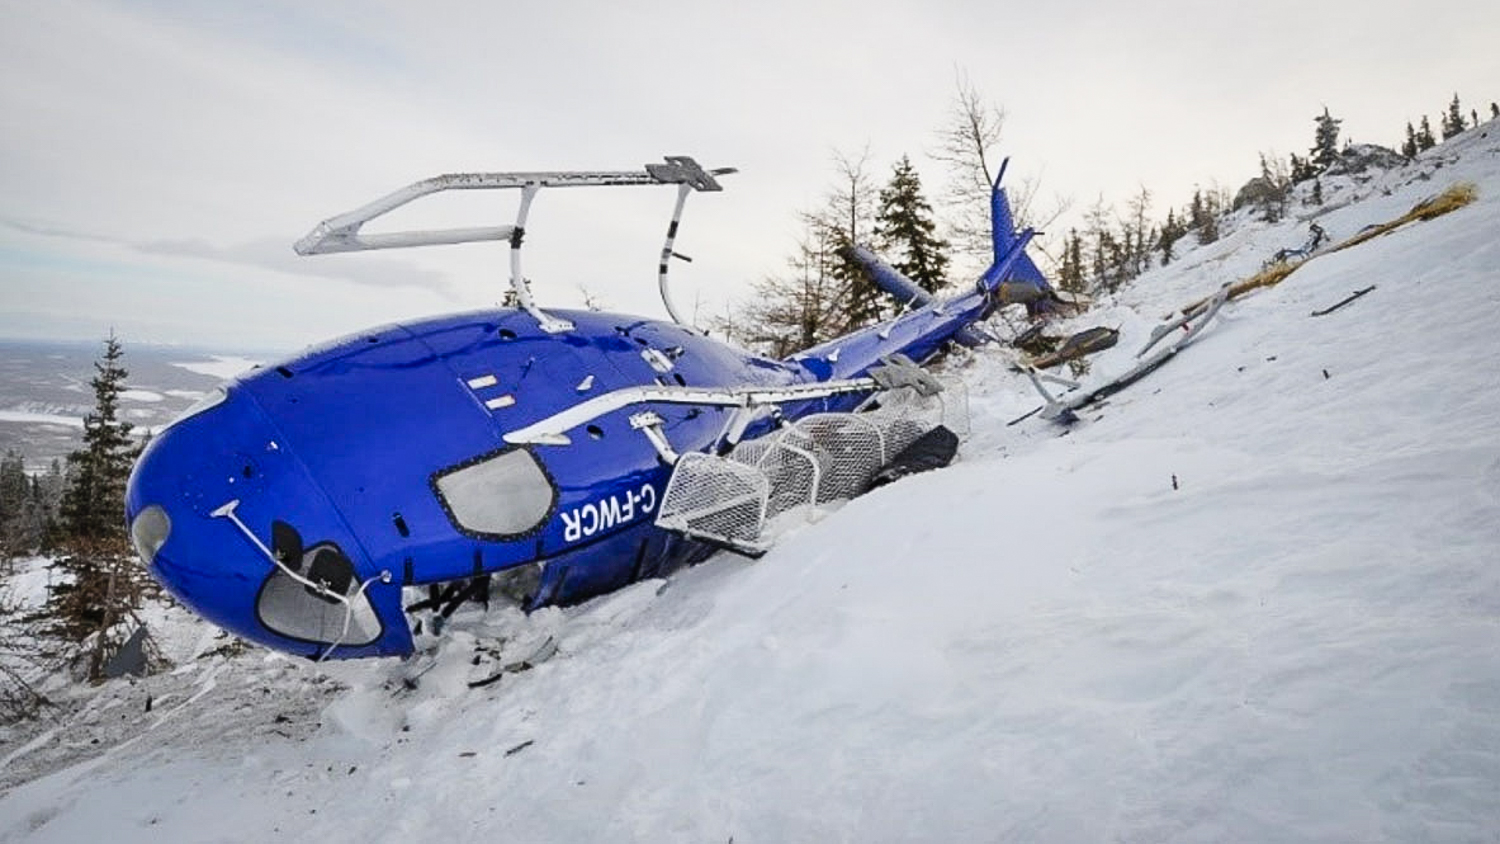 A photograph provided to the Transportation Safety Board of Canada by Great Slave Helicopters shows a downed helicopter in February 2018